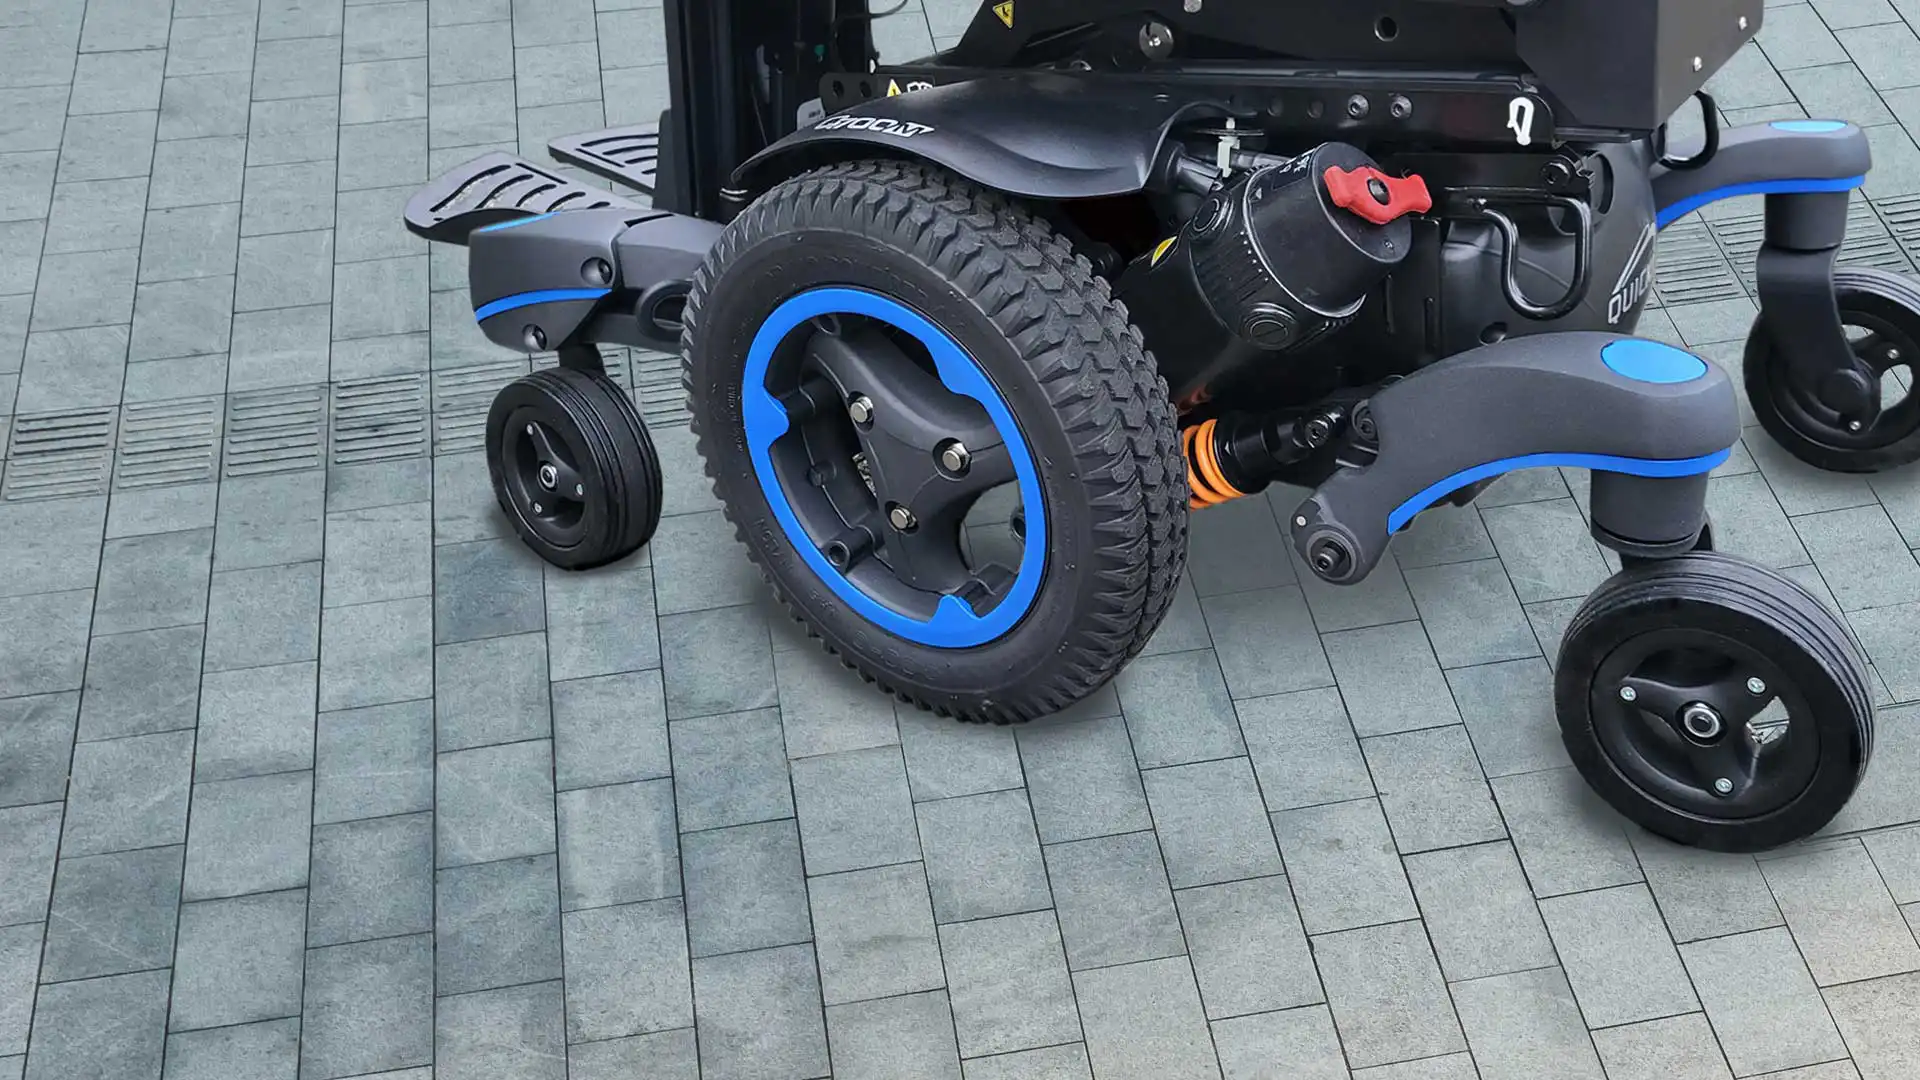 Sunrise Medical Unveils Exciting Upgrades to QUICKIE Q700 Power Wheelchairs